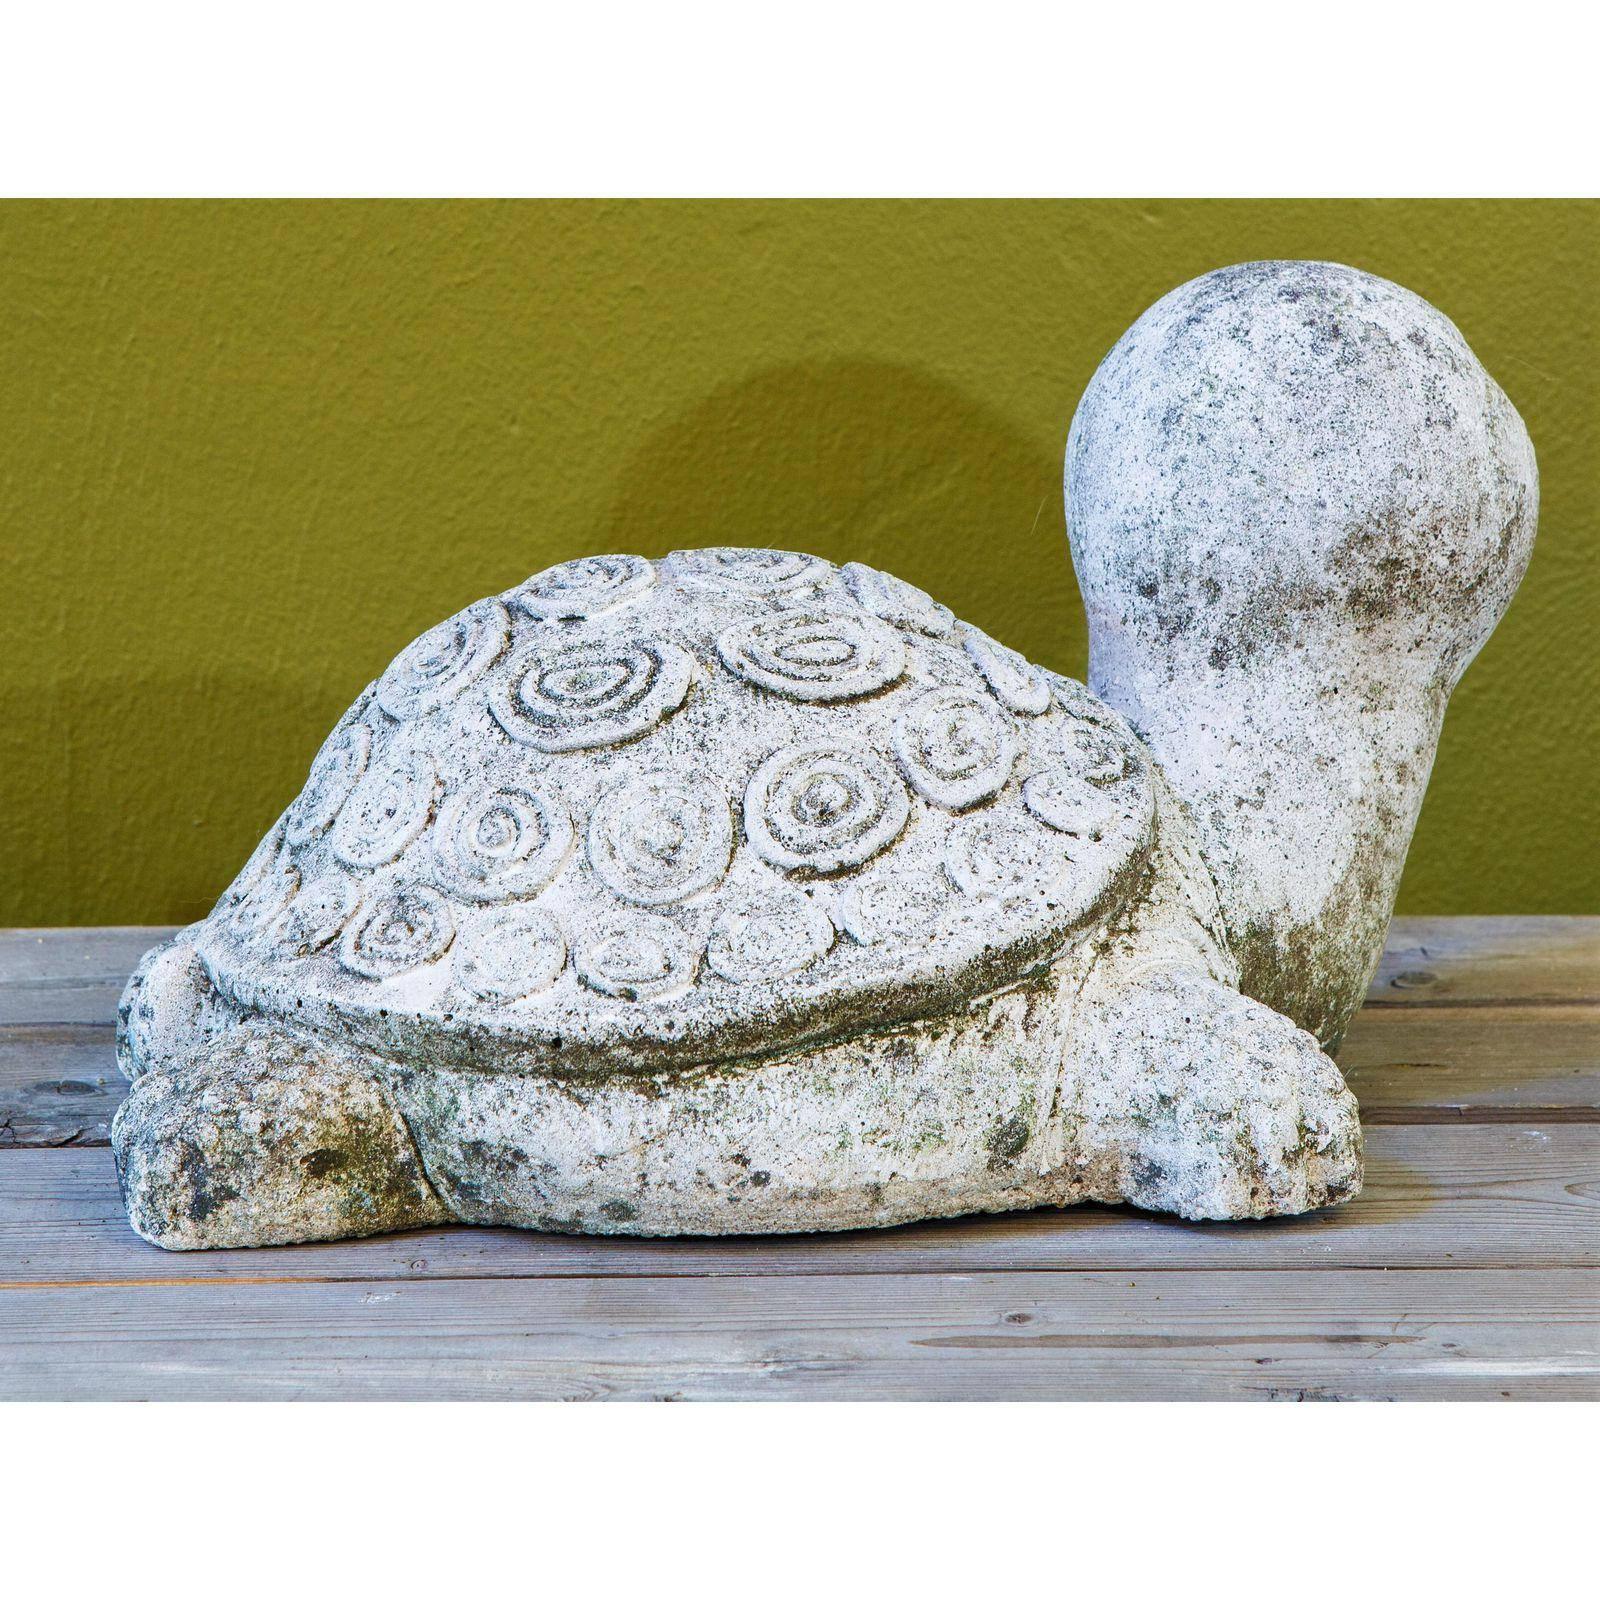 Heavy, vintage midcentury garden sculpture of a turtle from Spain. Was originally used as a fountain. Stamped on the side with label. Wonderful relief, texture and patina.